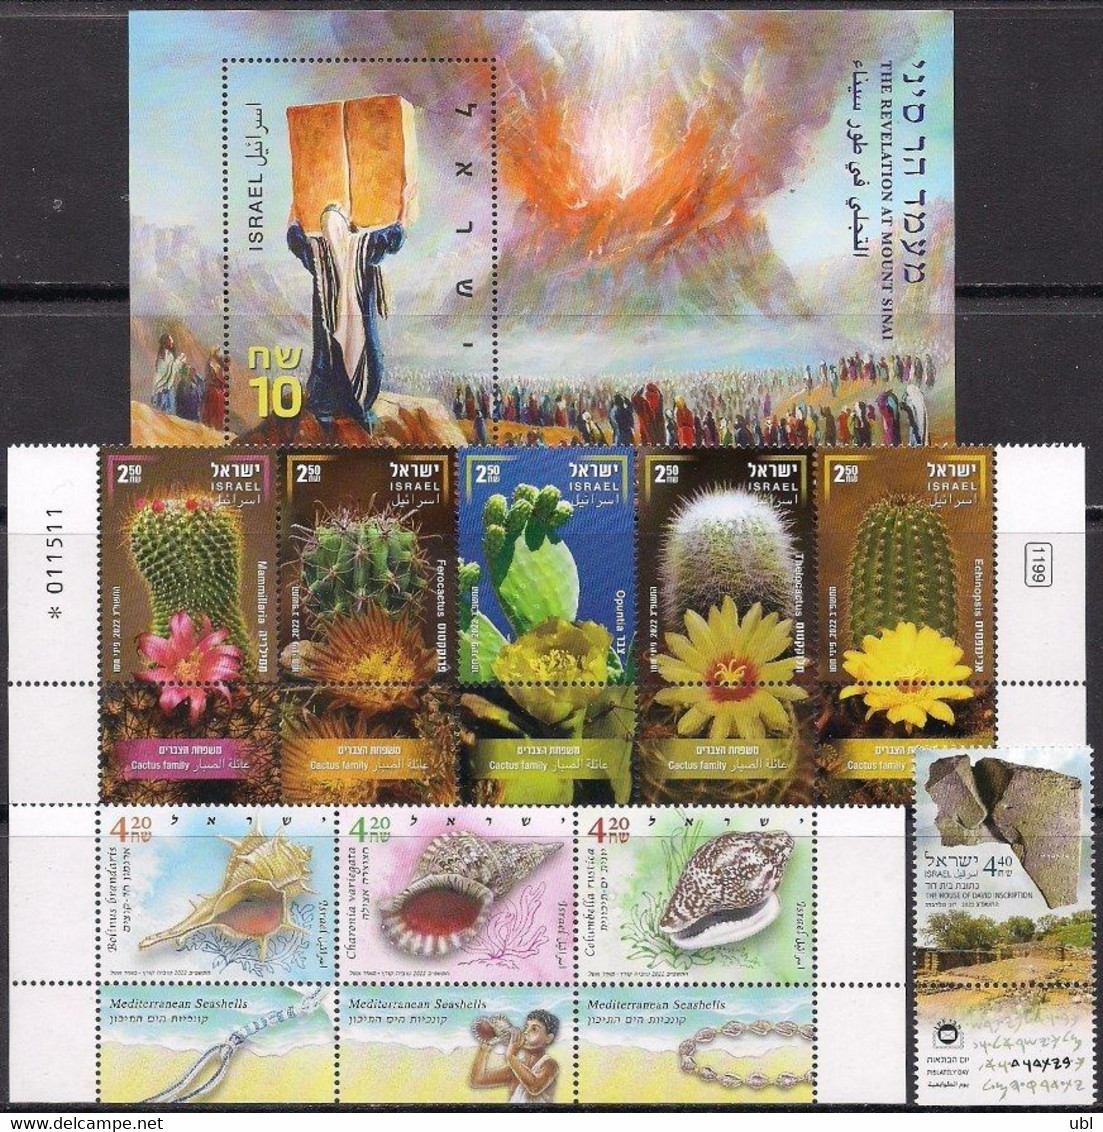 ISRAEL 2022 YEARBOOK - THE COMPLETE ANNUAL STAMPS & SOUVENIR SHEET ISSUE IN A DECORATIVE ALBUM - Collections, Lots & Séries